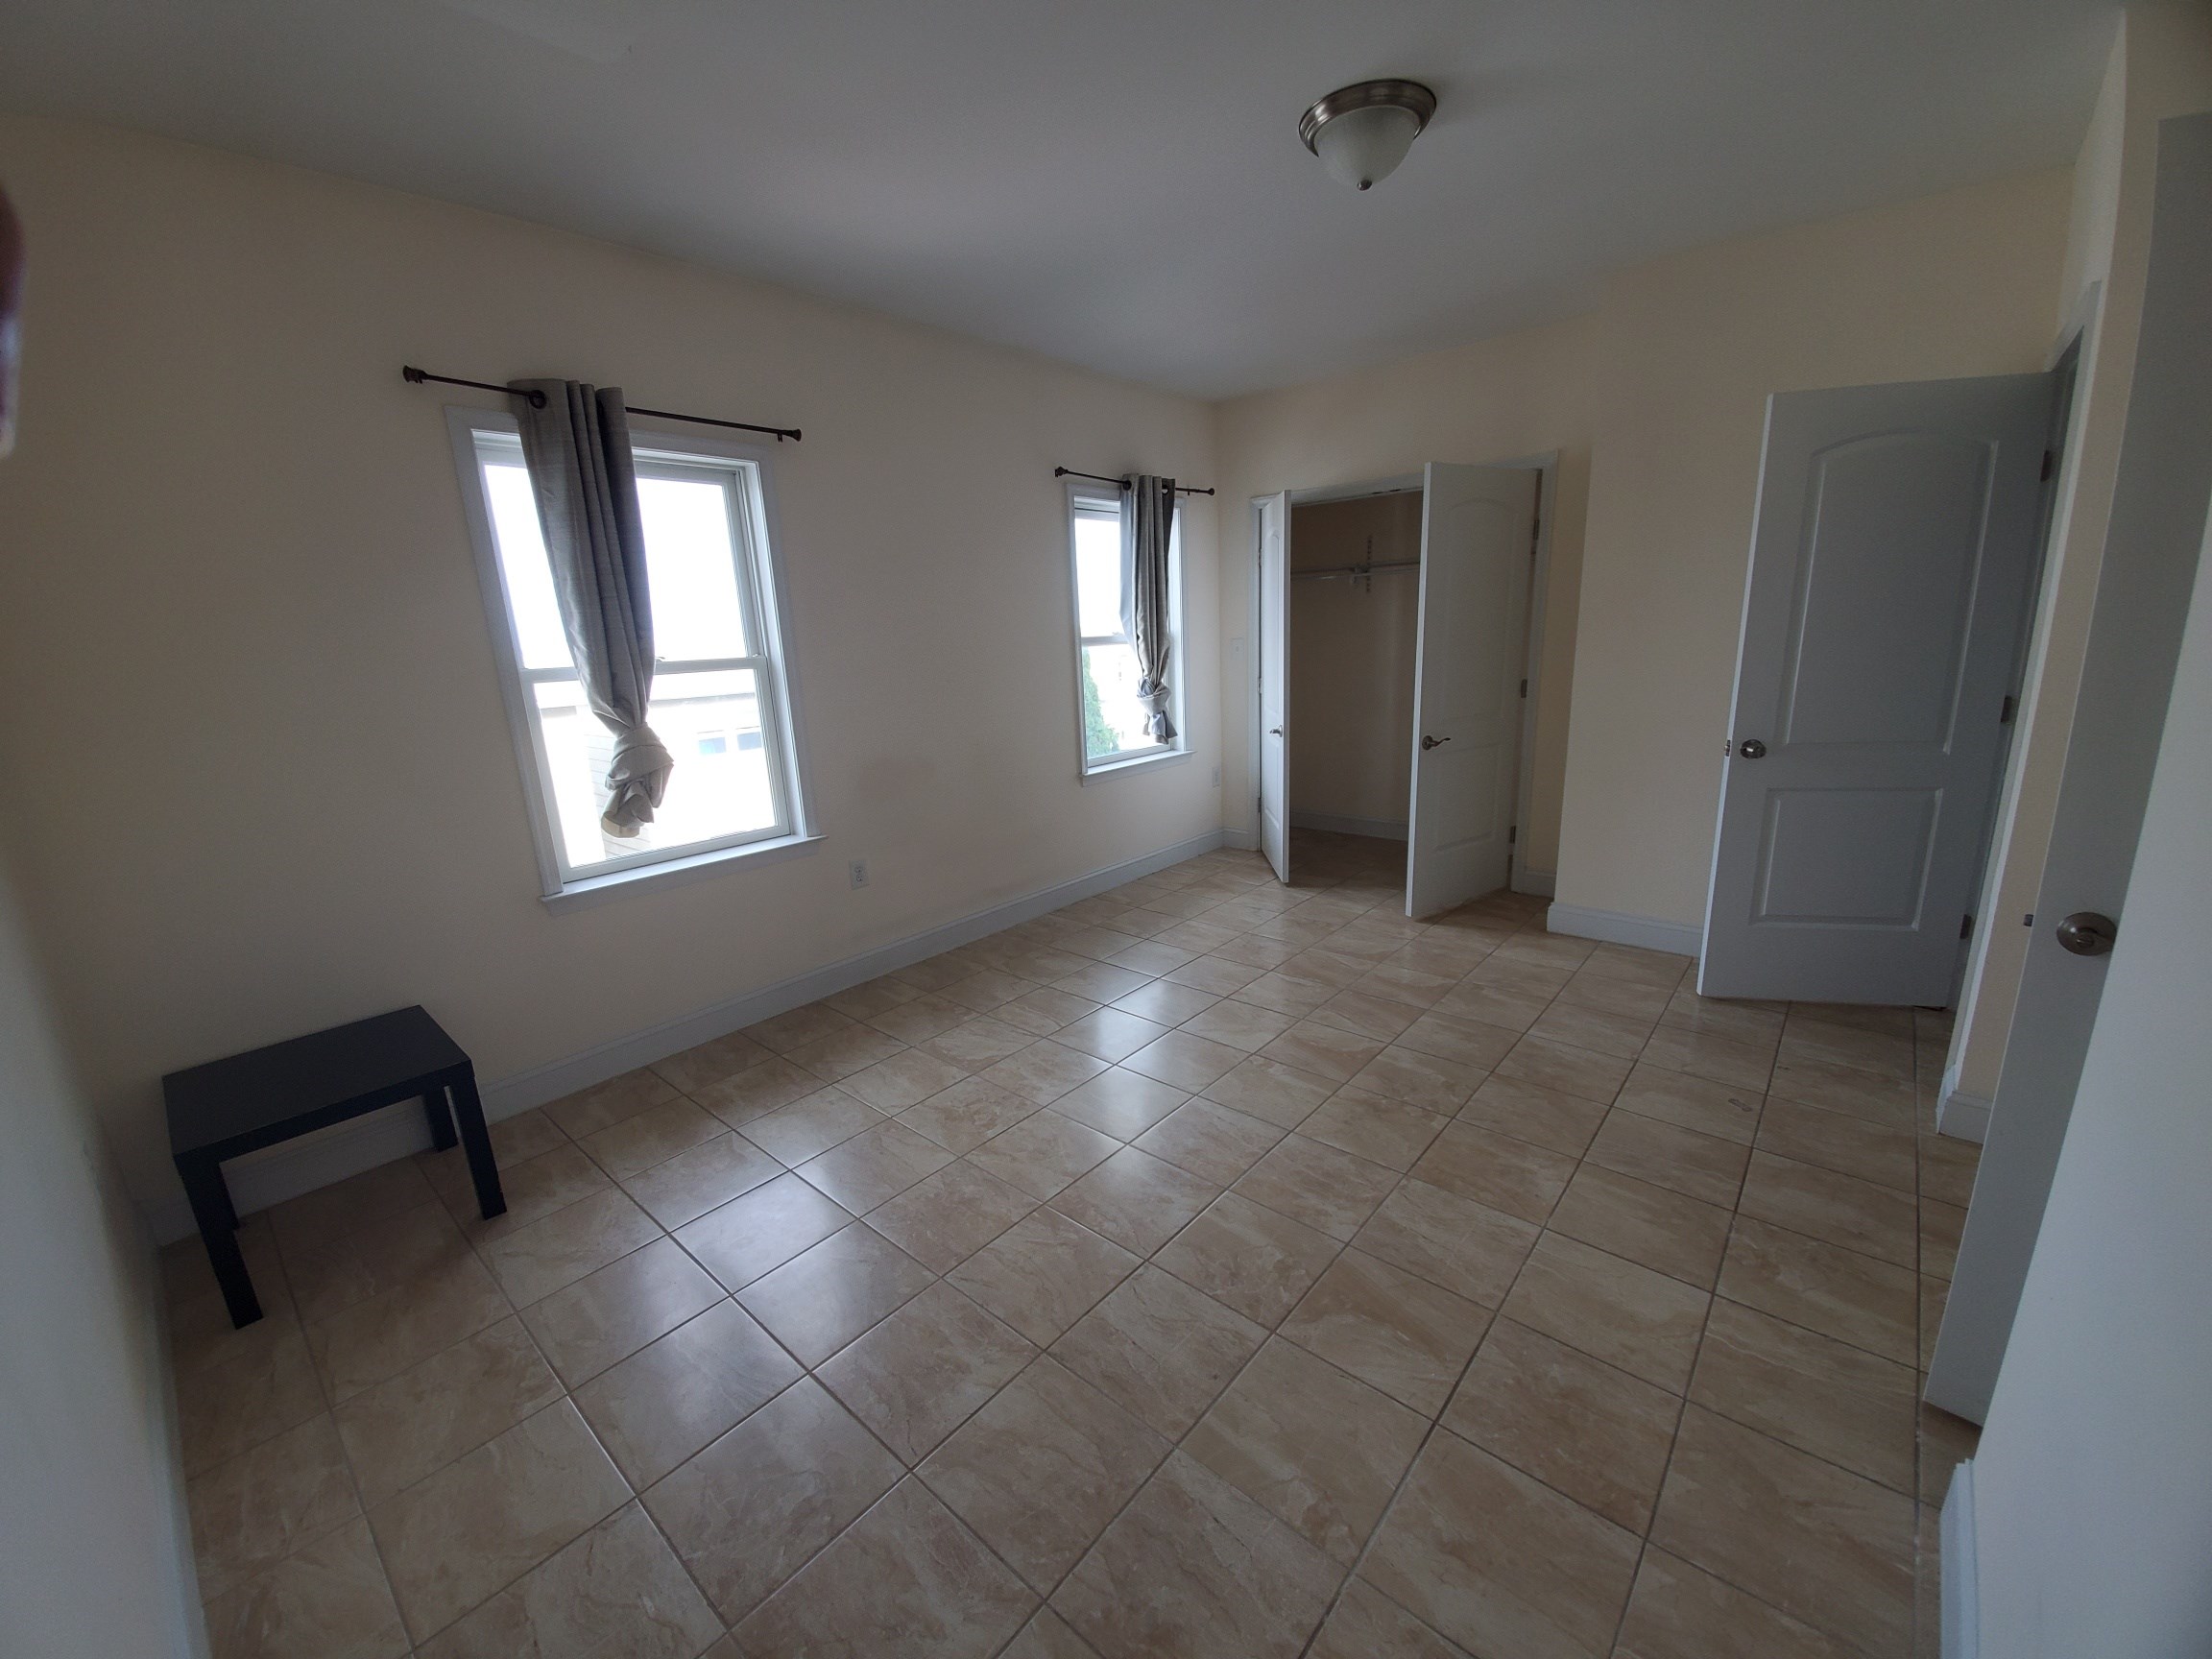 rooms for rent in jersey city heights nj